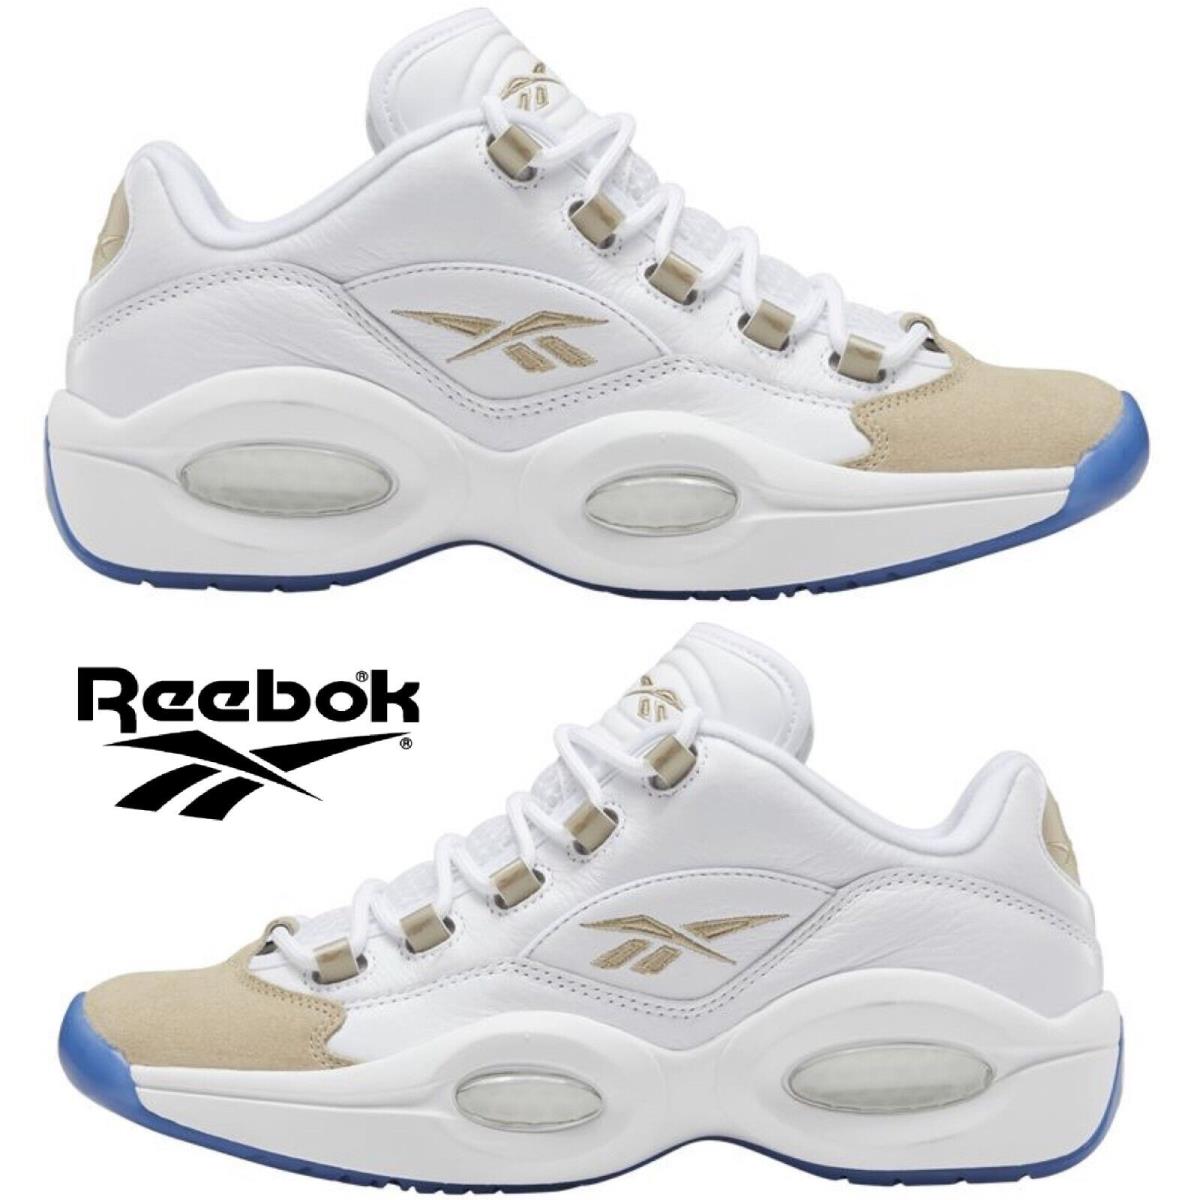 Reebok Question Low Basketball Shoes Men`s Sneakers Running Casual Sport White